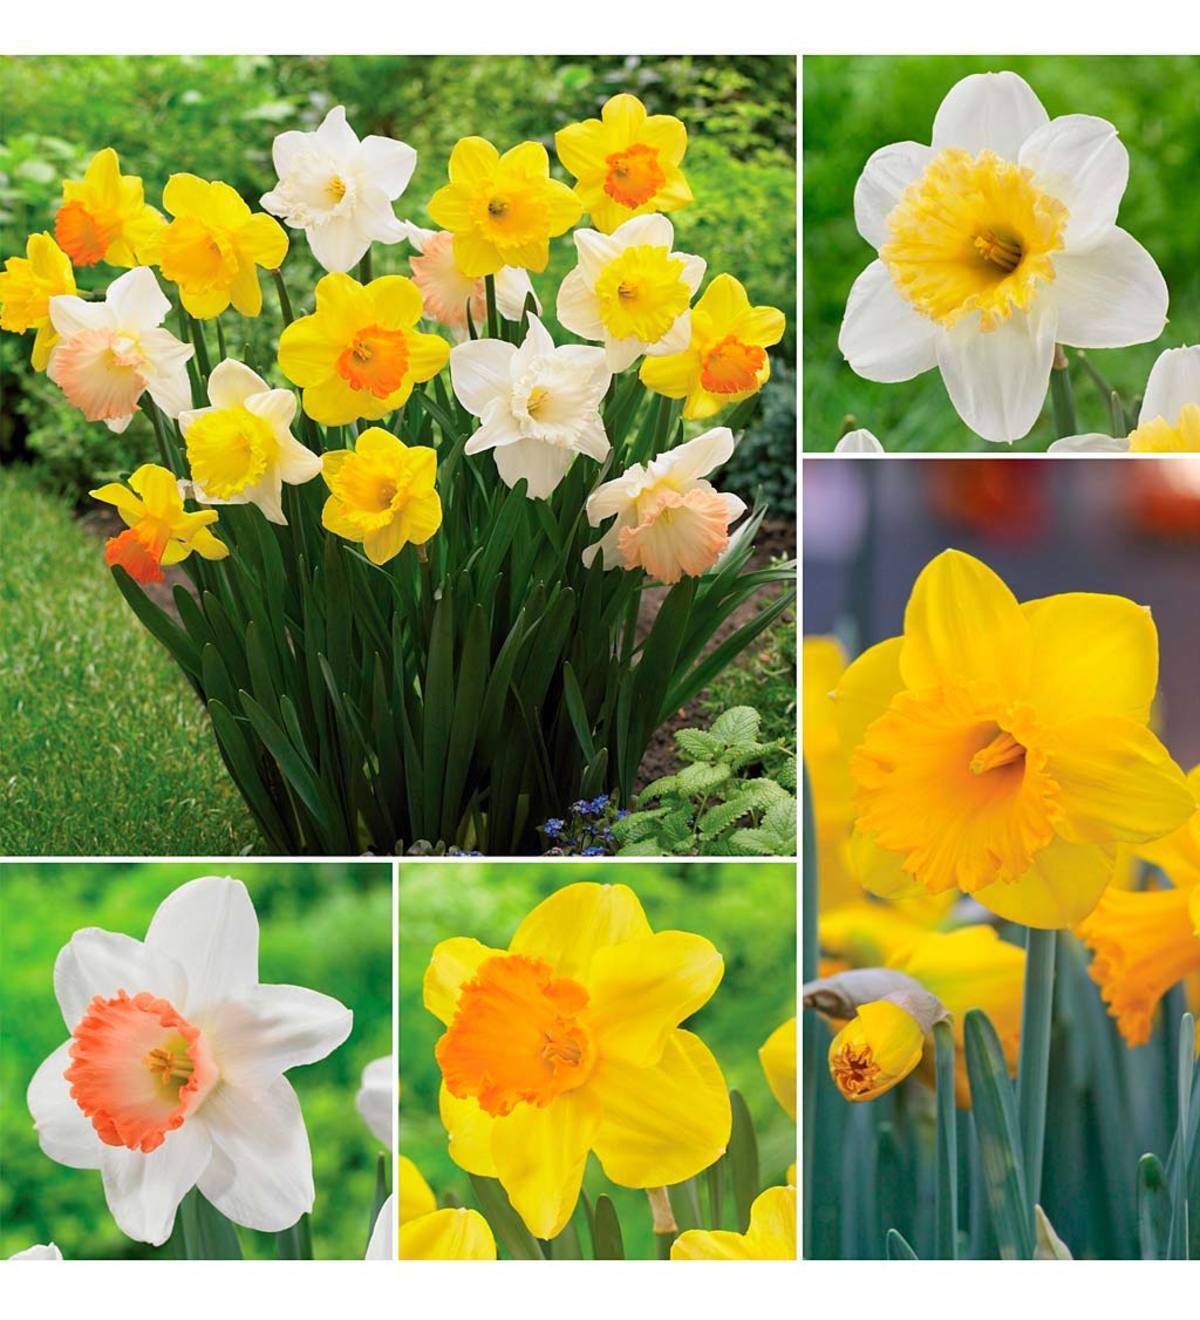 Big Blooms Daffodil Bulb Collection, 25 bulbs each of 4 varieties